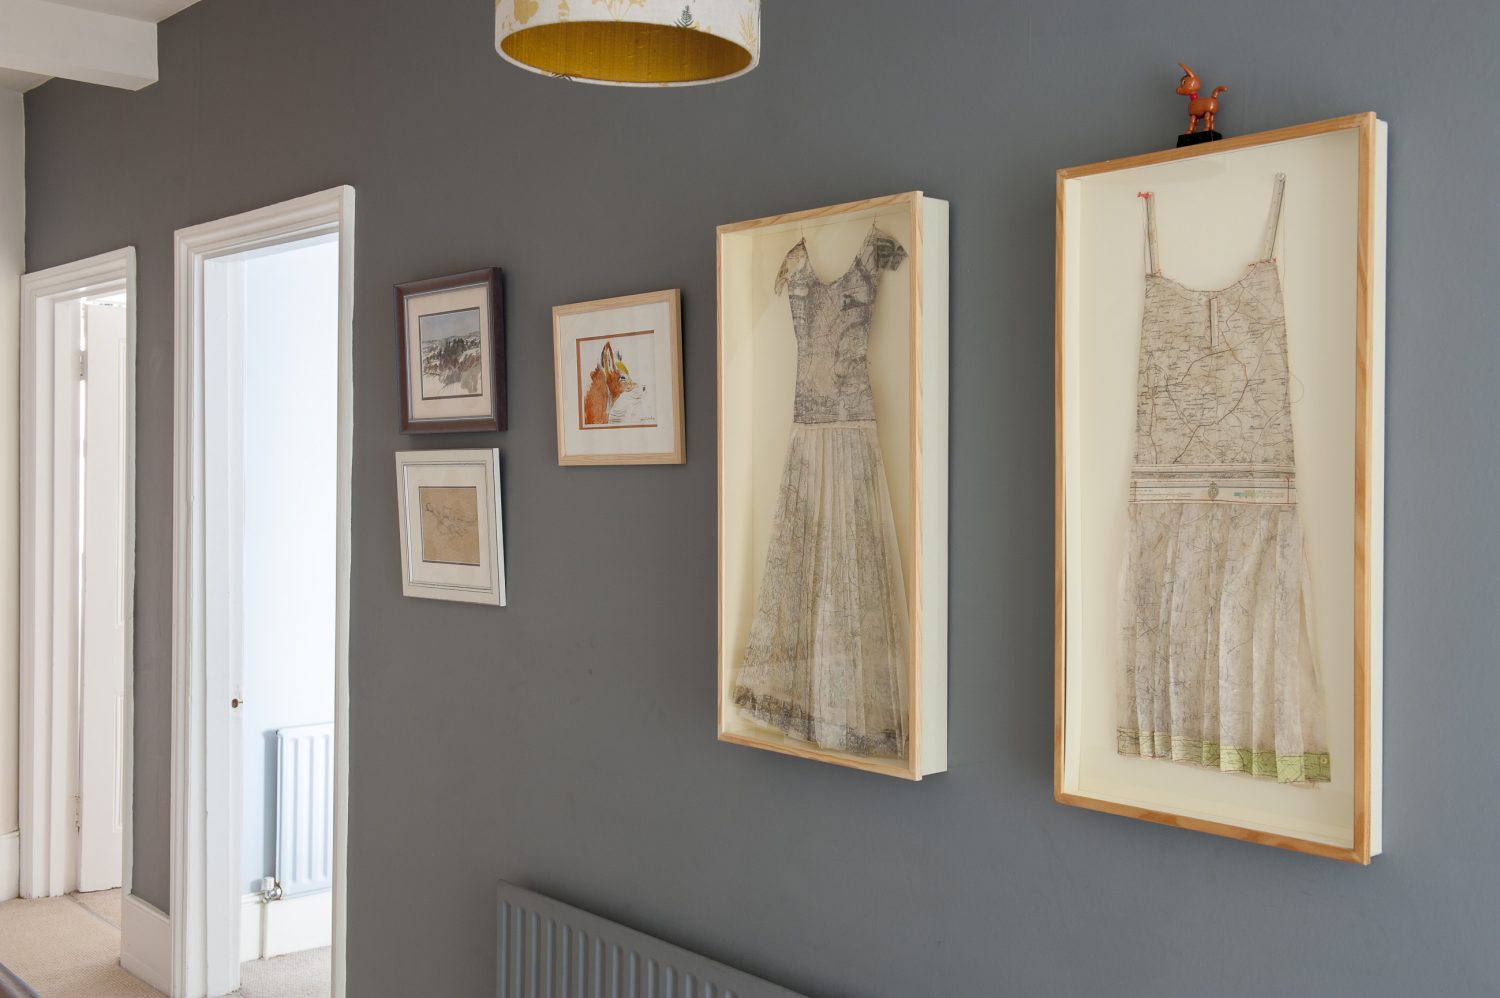 On the landing. Louise made the paper dresses out of old maps